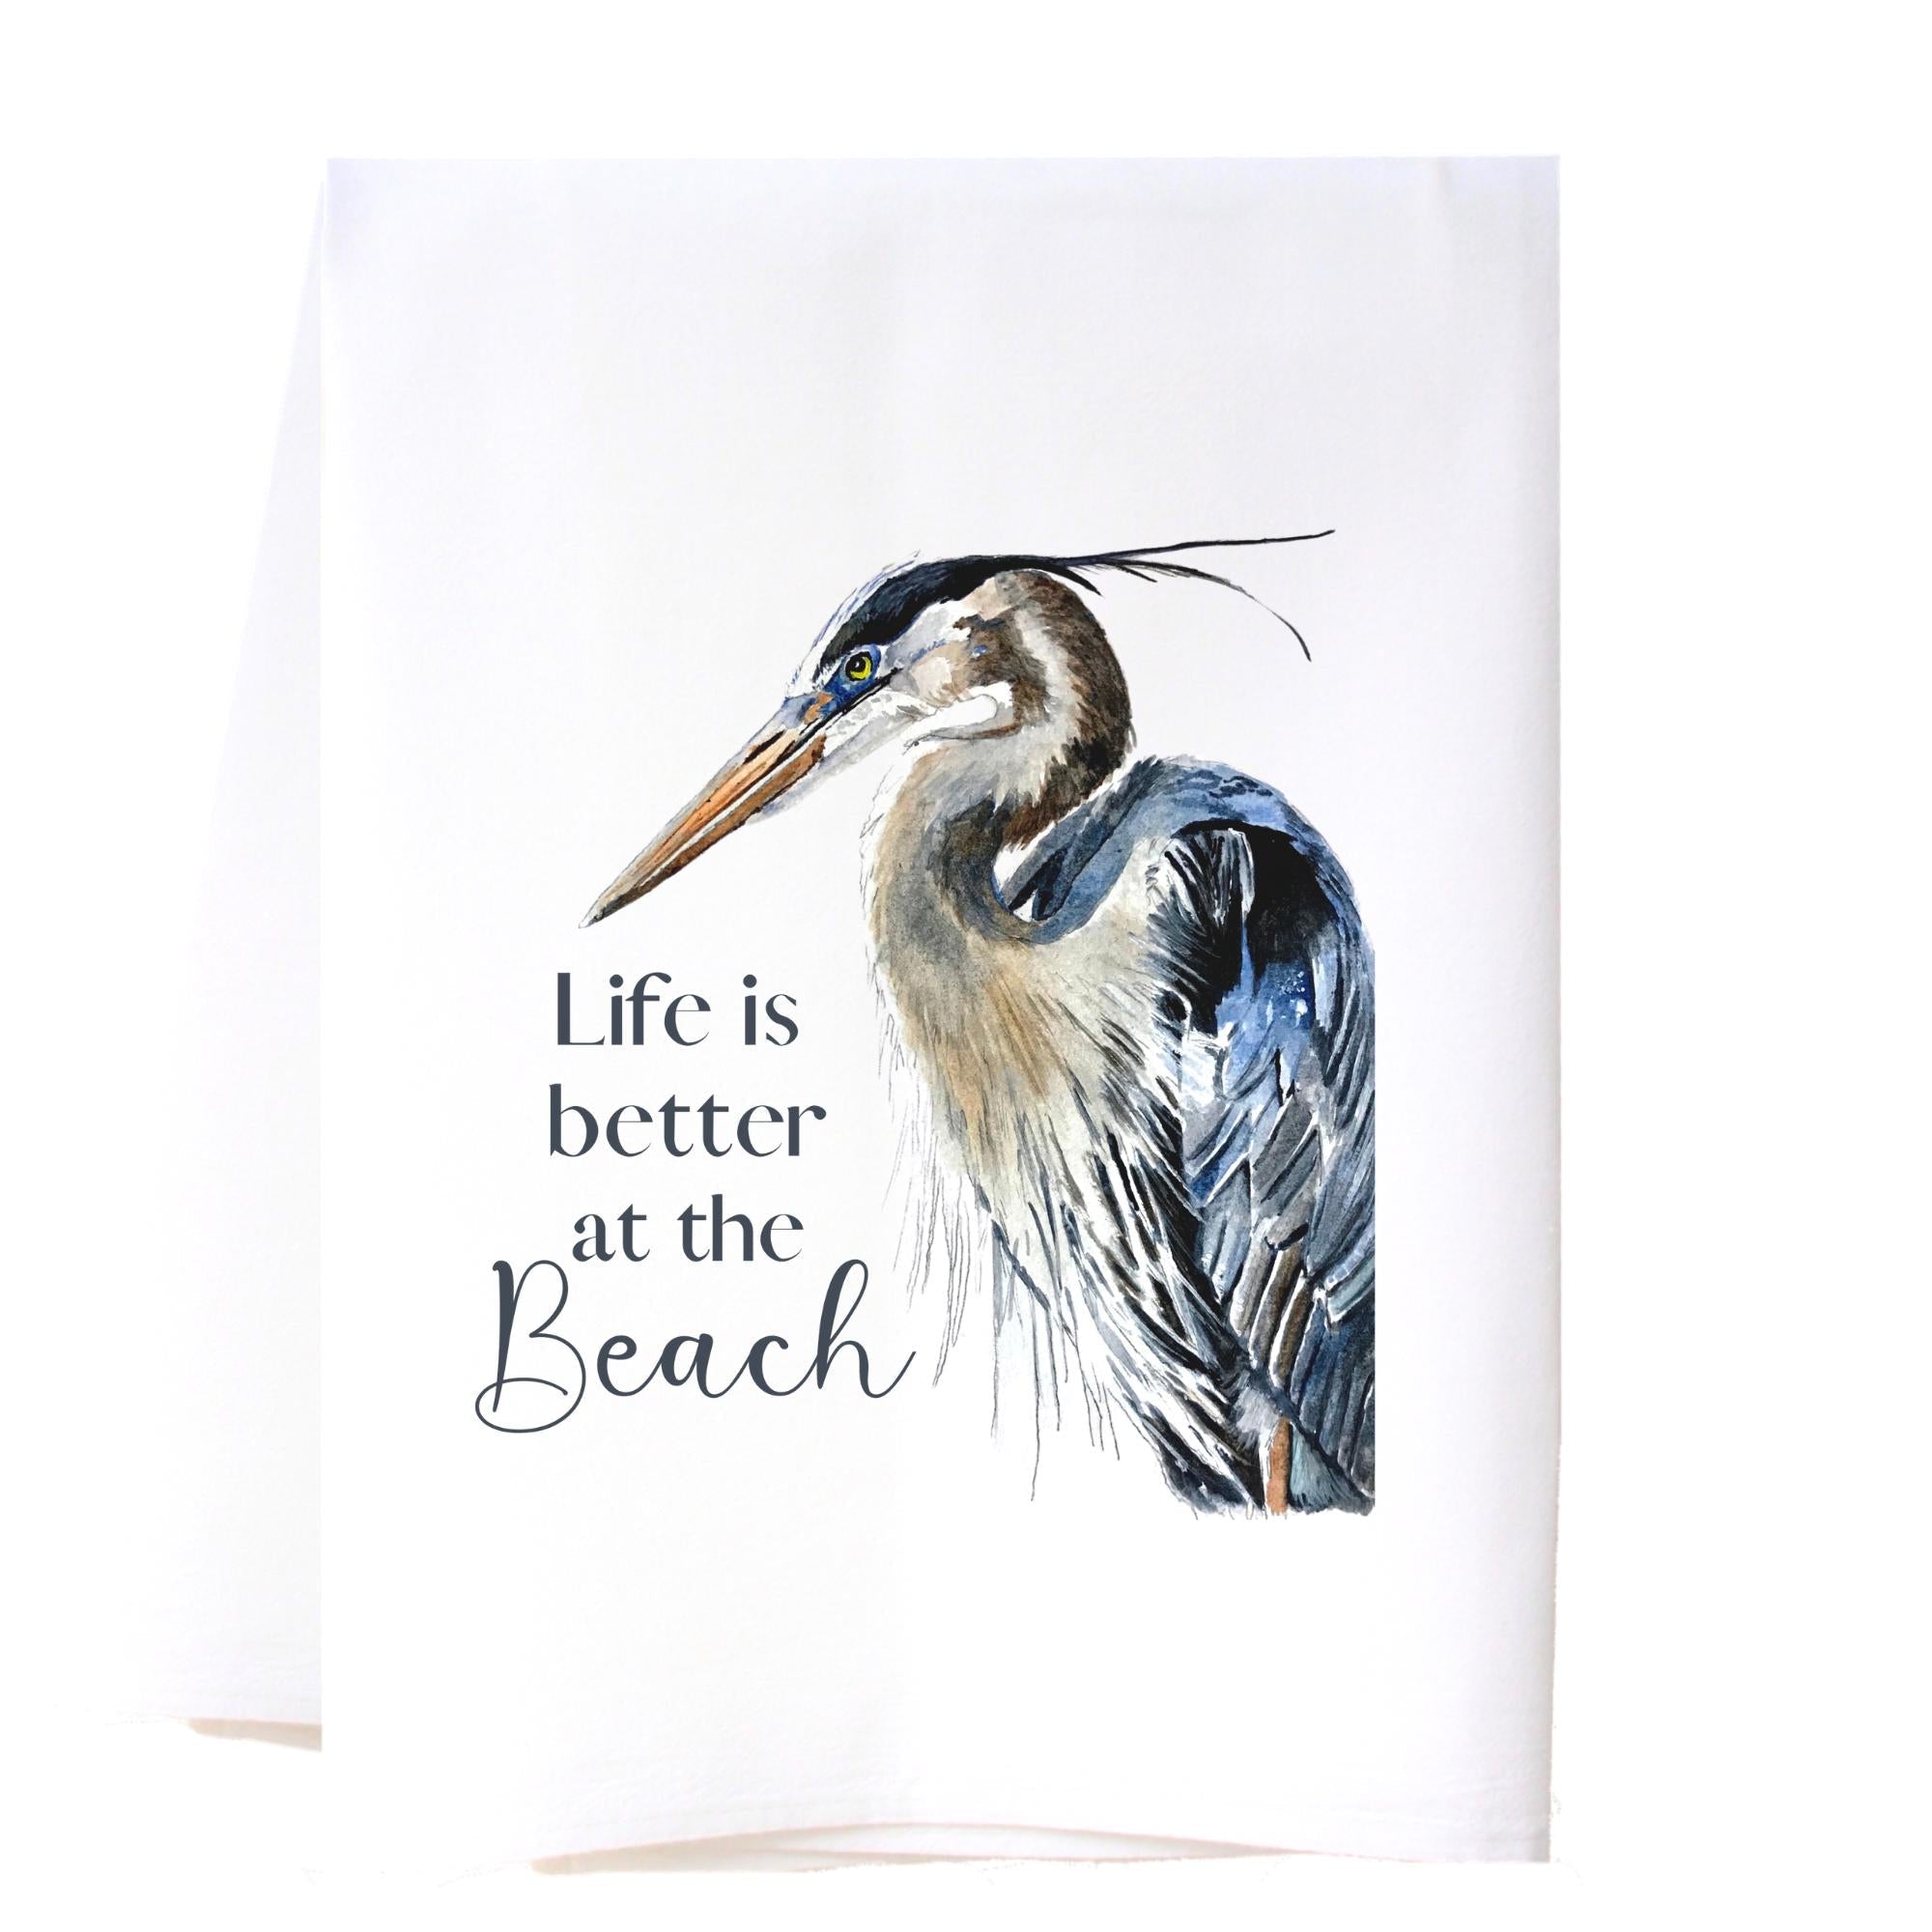 Life Is Better At The Beach Flour Sack Towel Kitchen Towel/Dishcloth - Southern Sisters